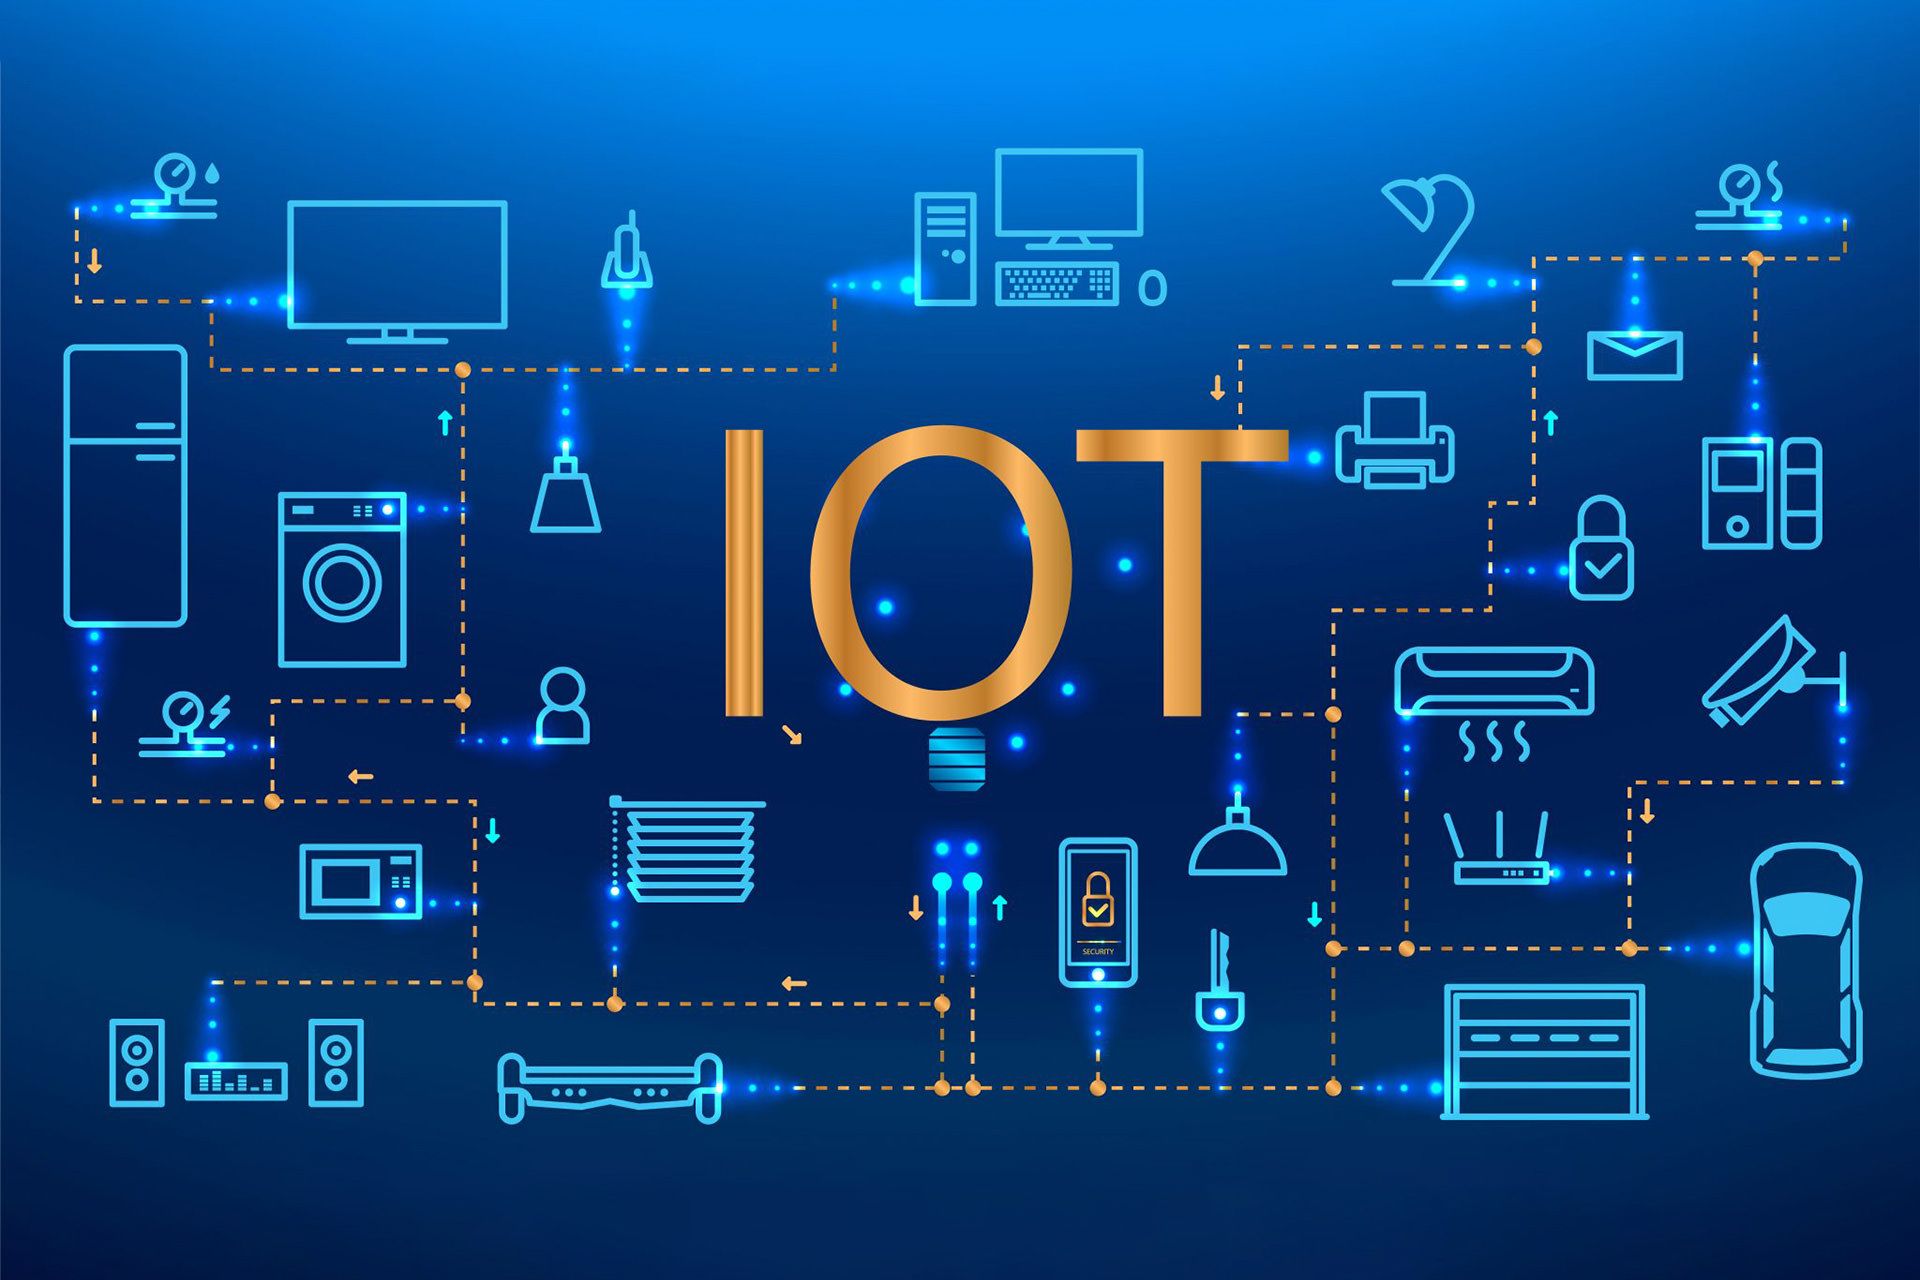 Devices connected to the IoT network